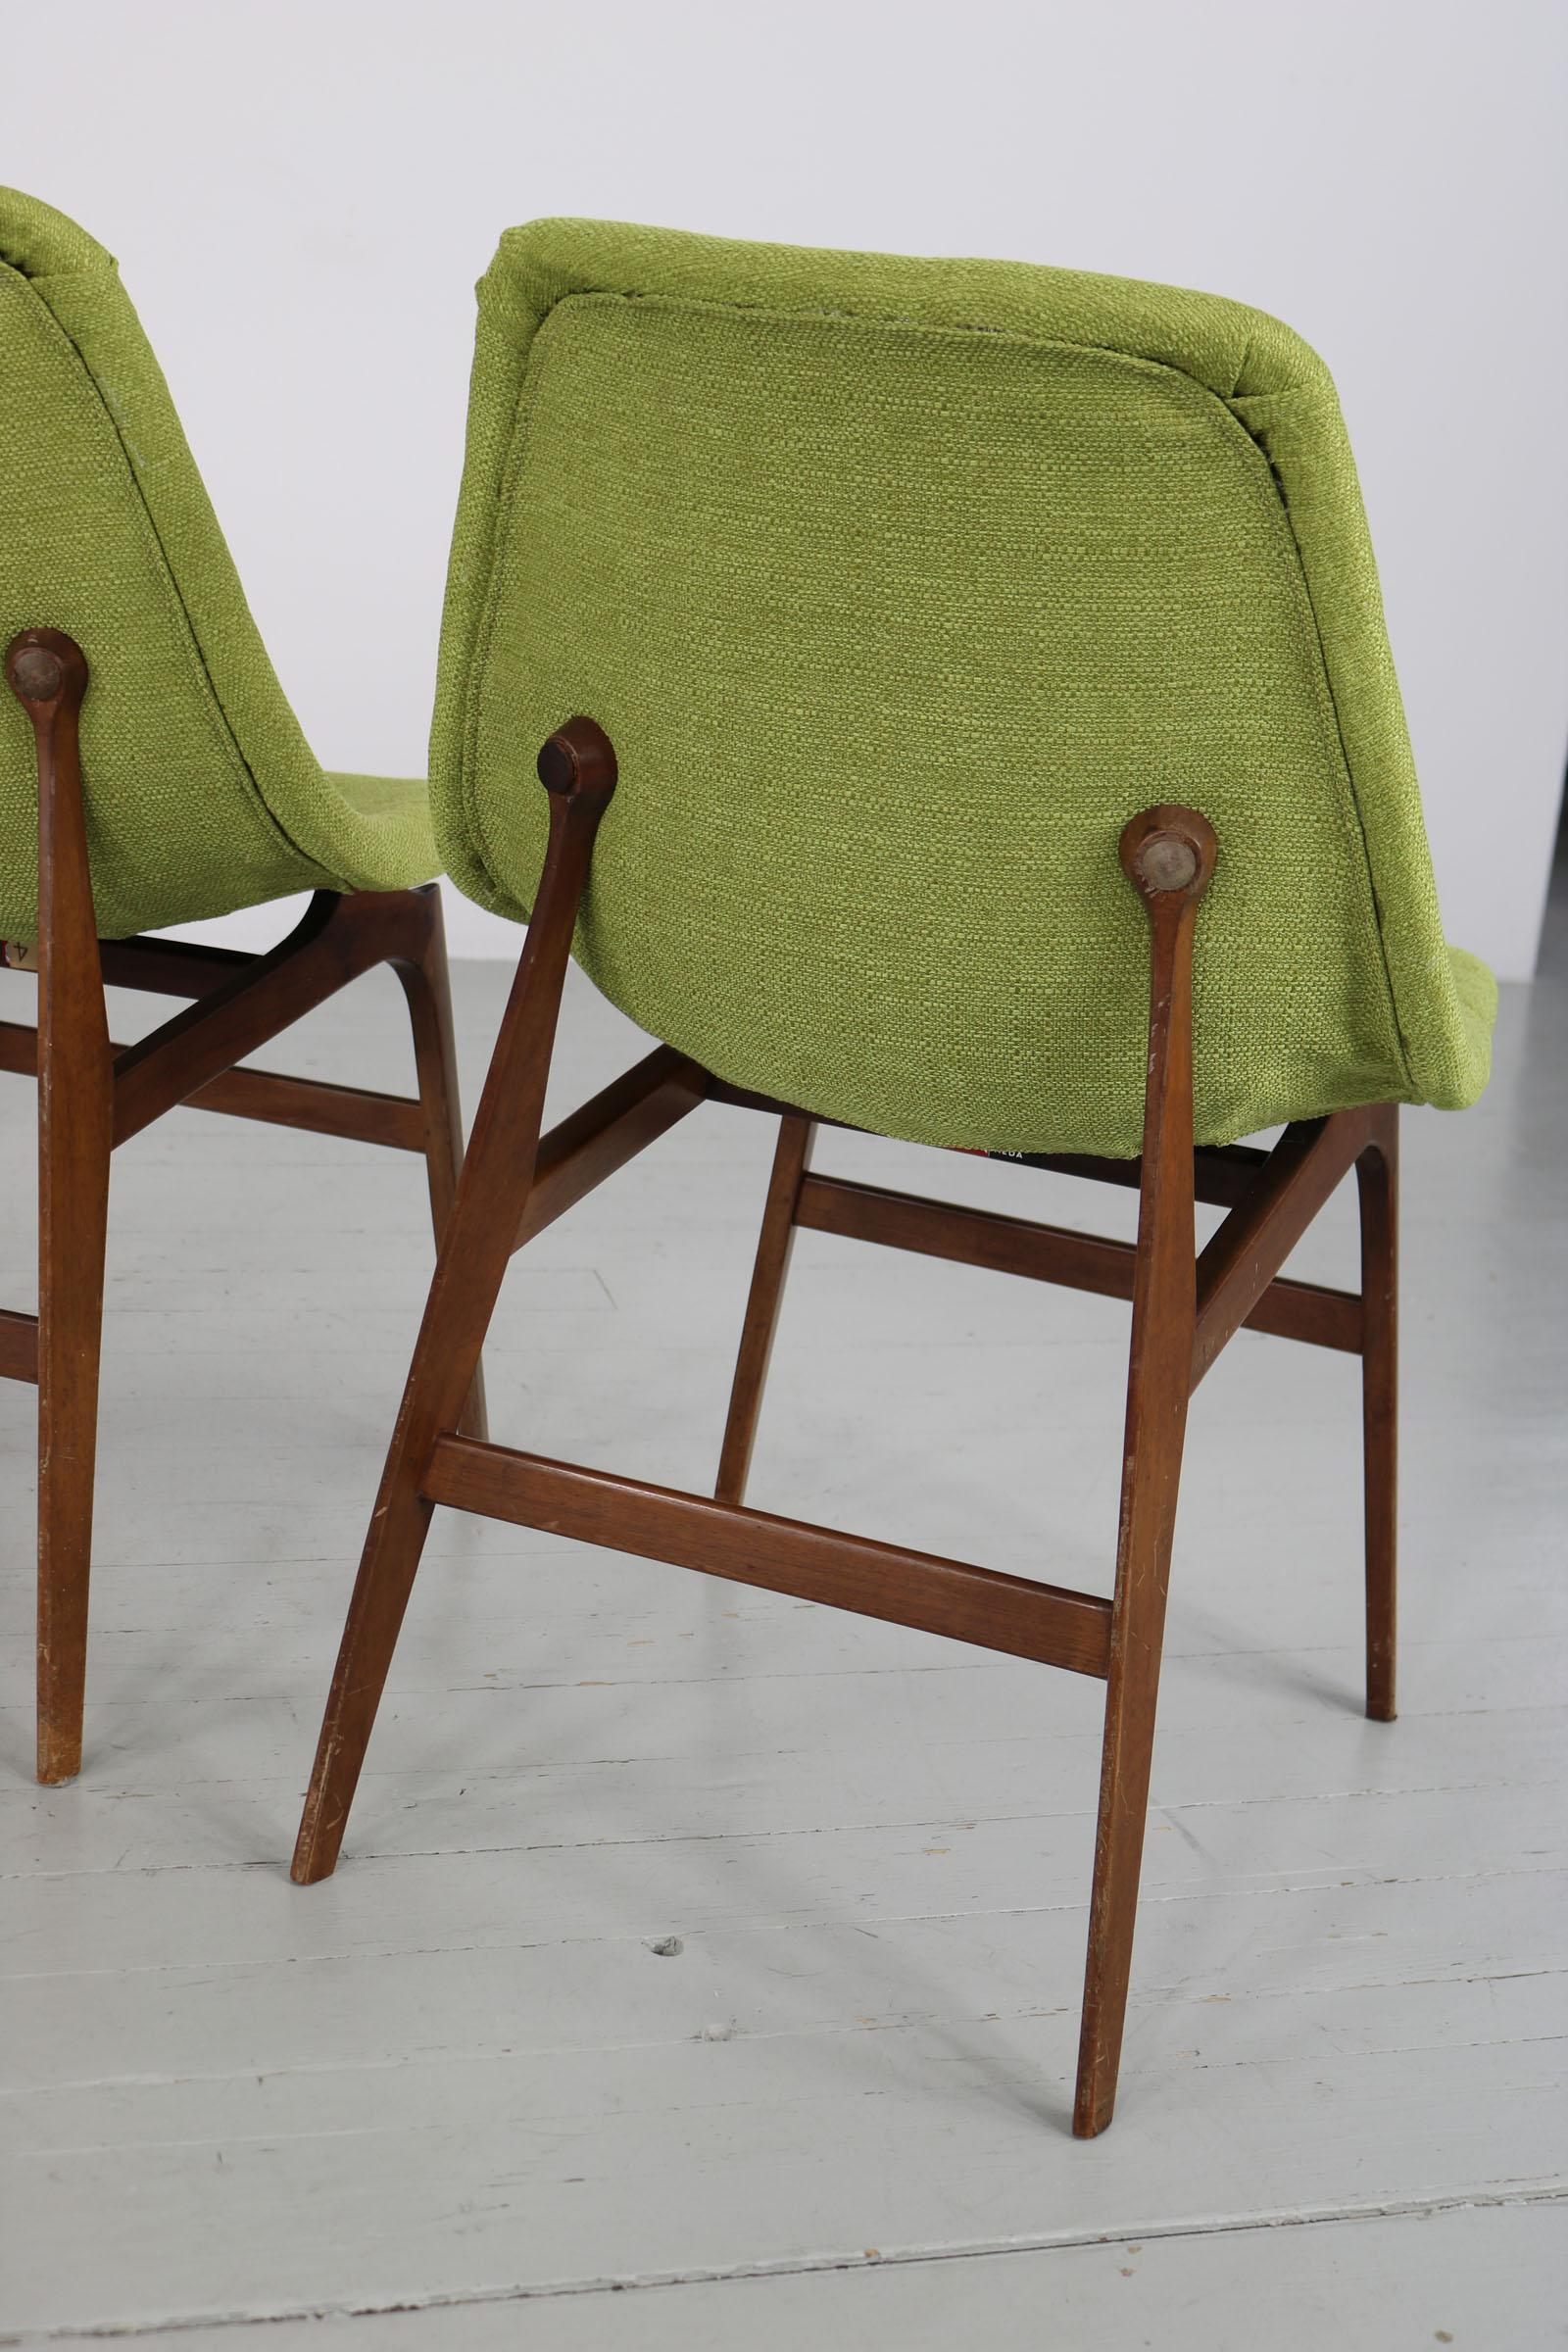 Set of 4 Busnelli Meda Teak Chairs, Italy 1960s For Sale 2